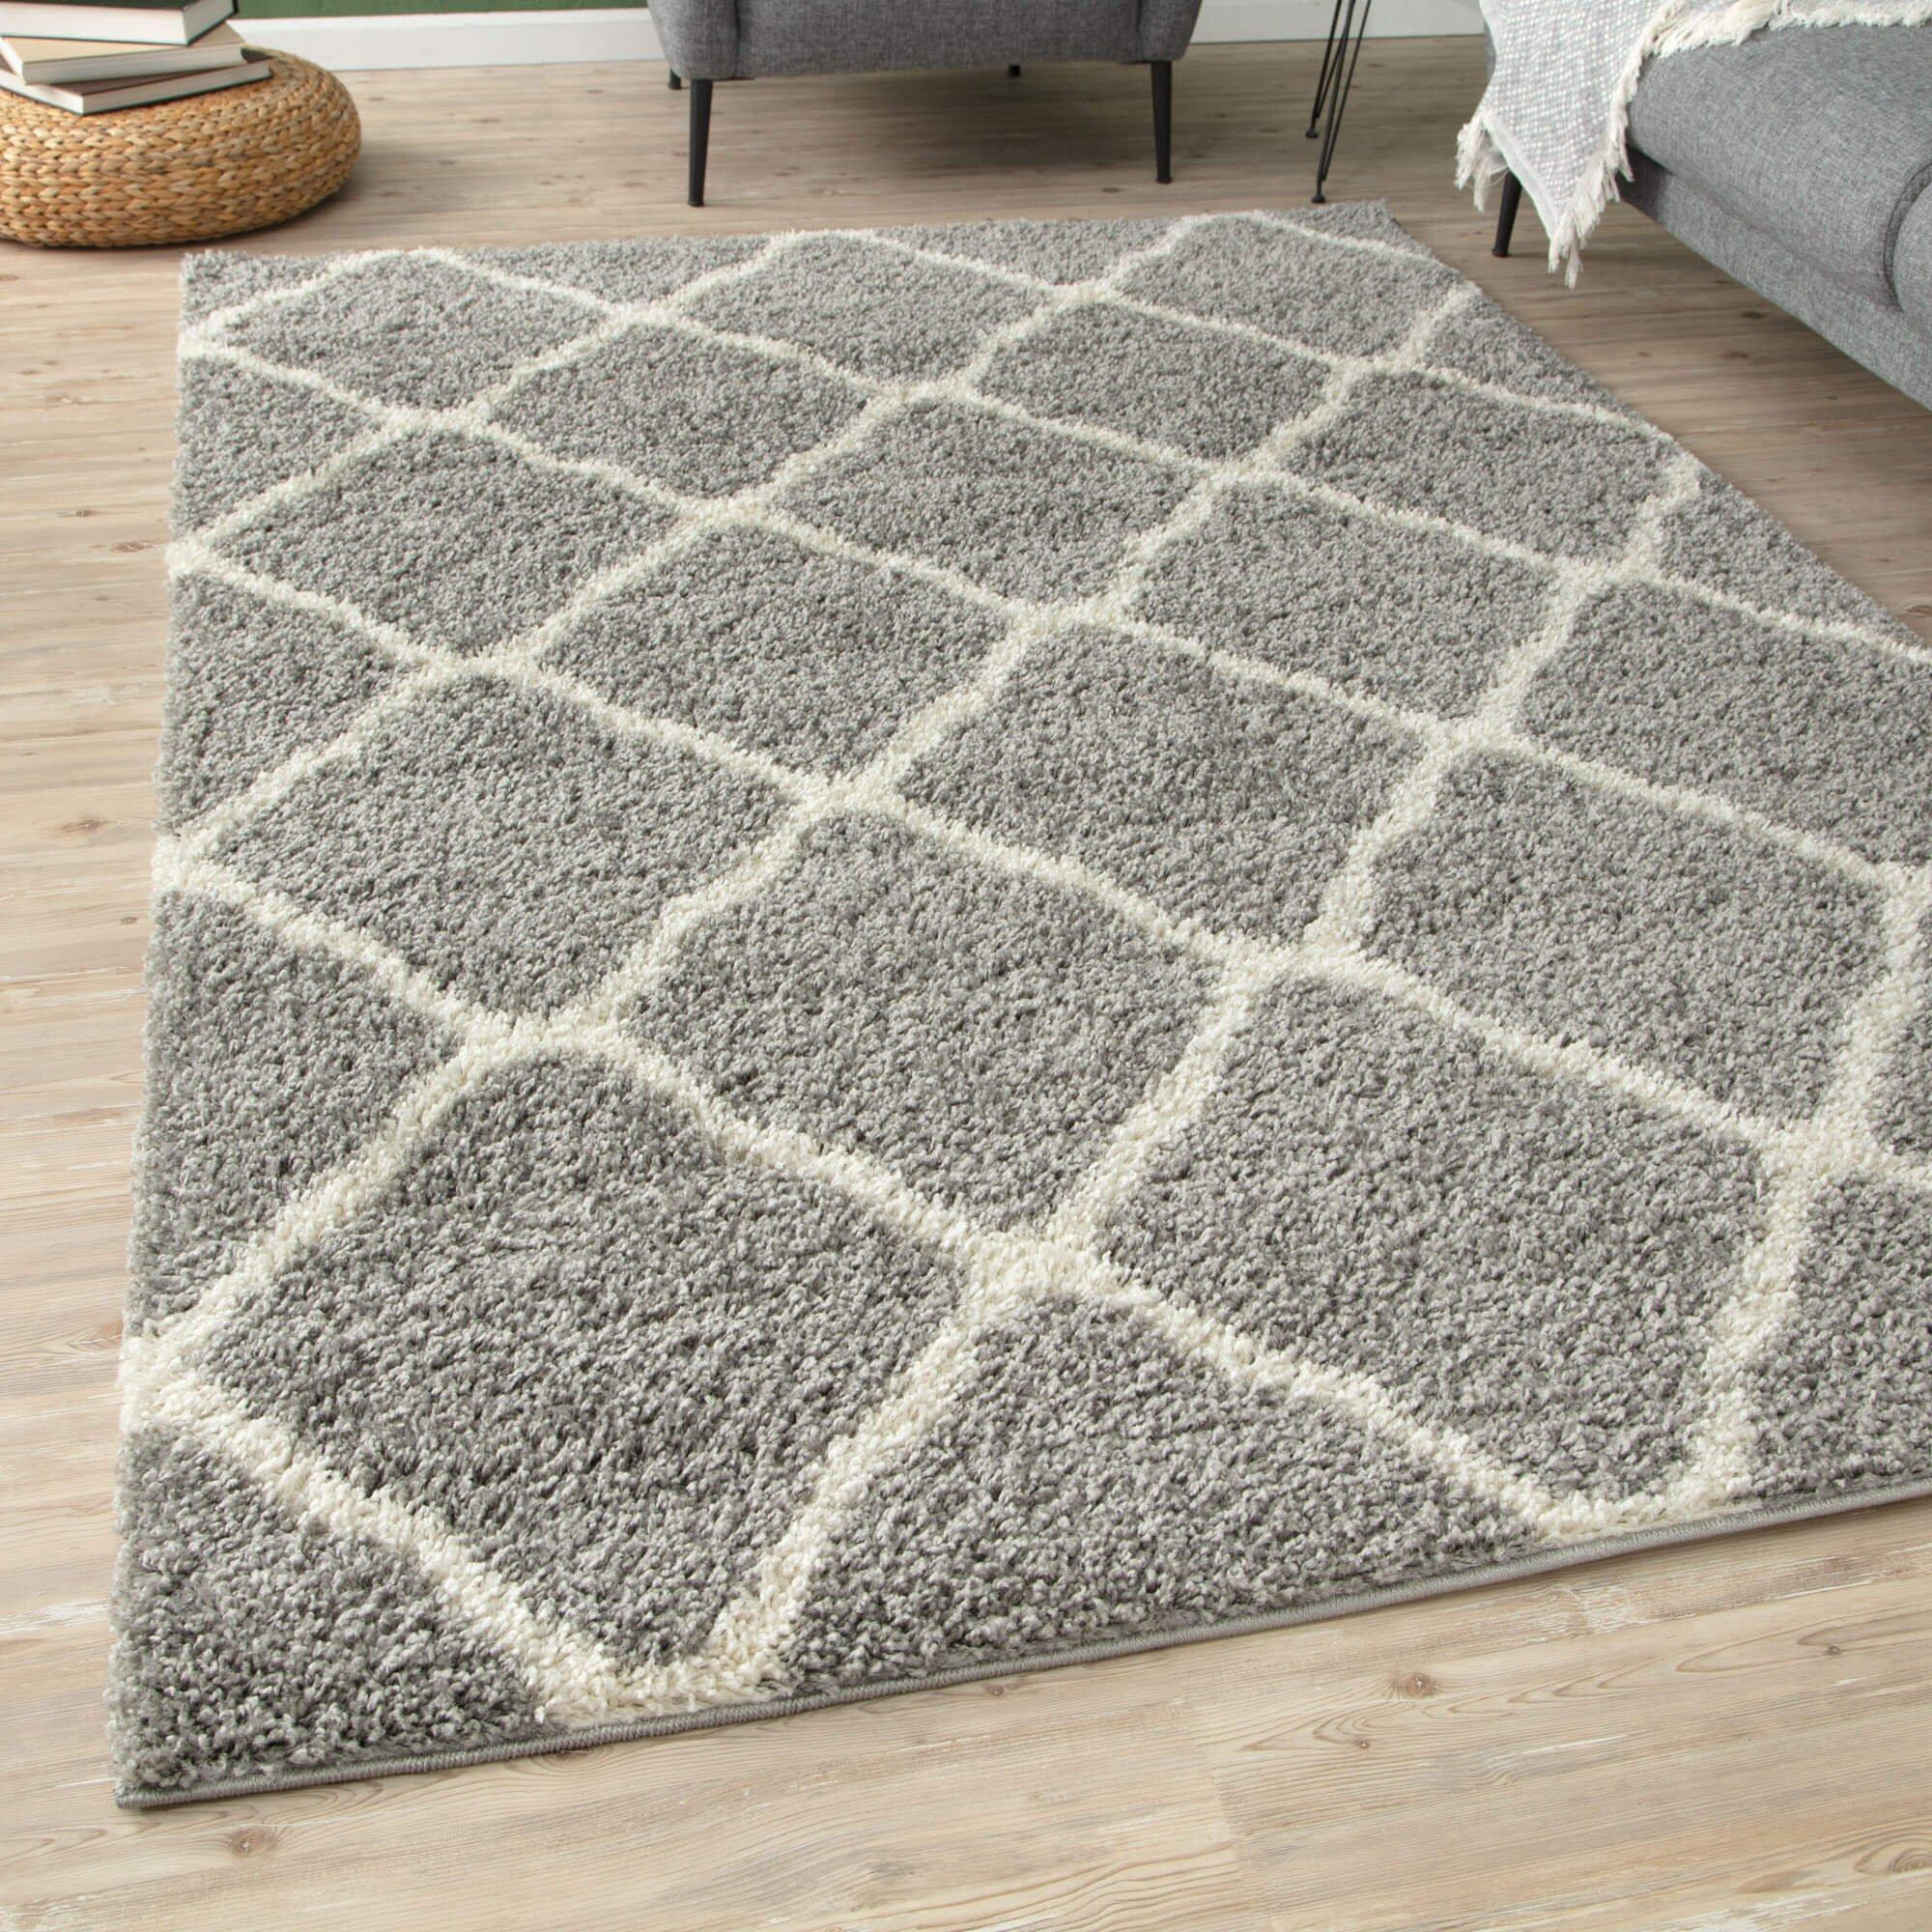 Myshaggy Collection Rugs Moroccan Design in Grey - 385 GI - image 1